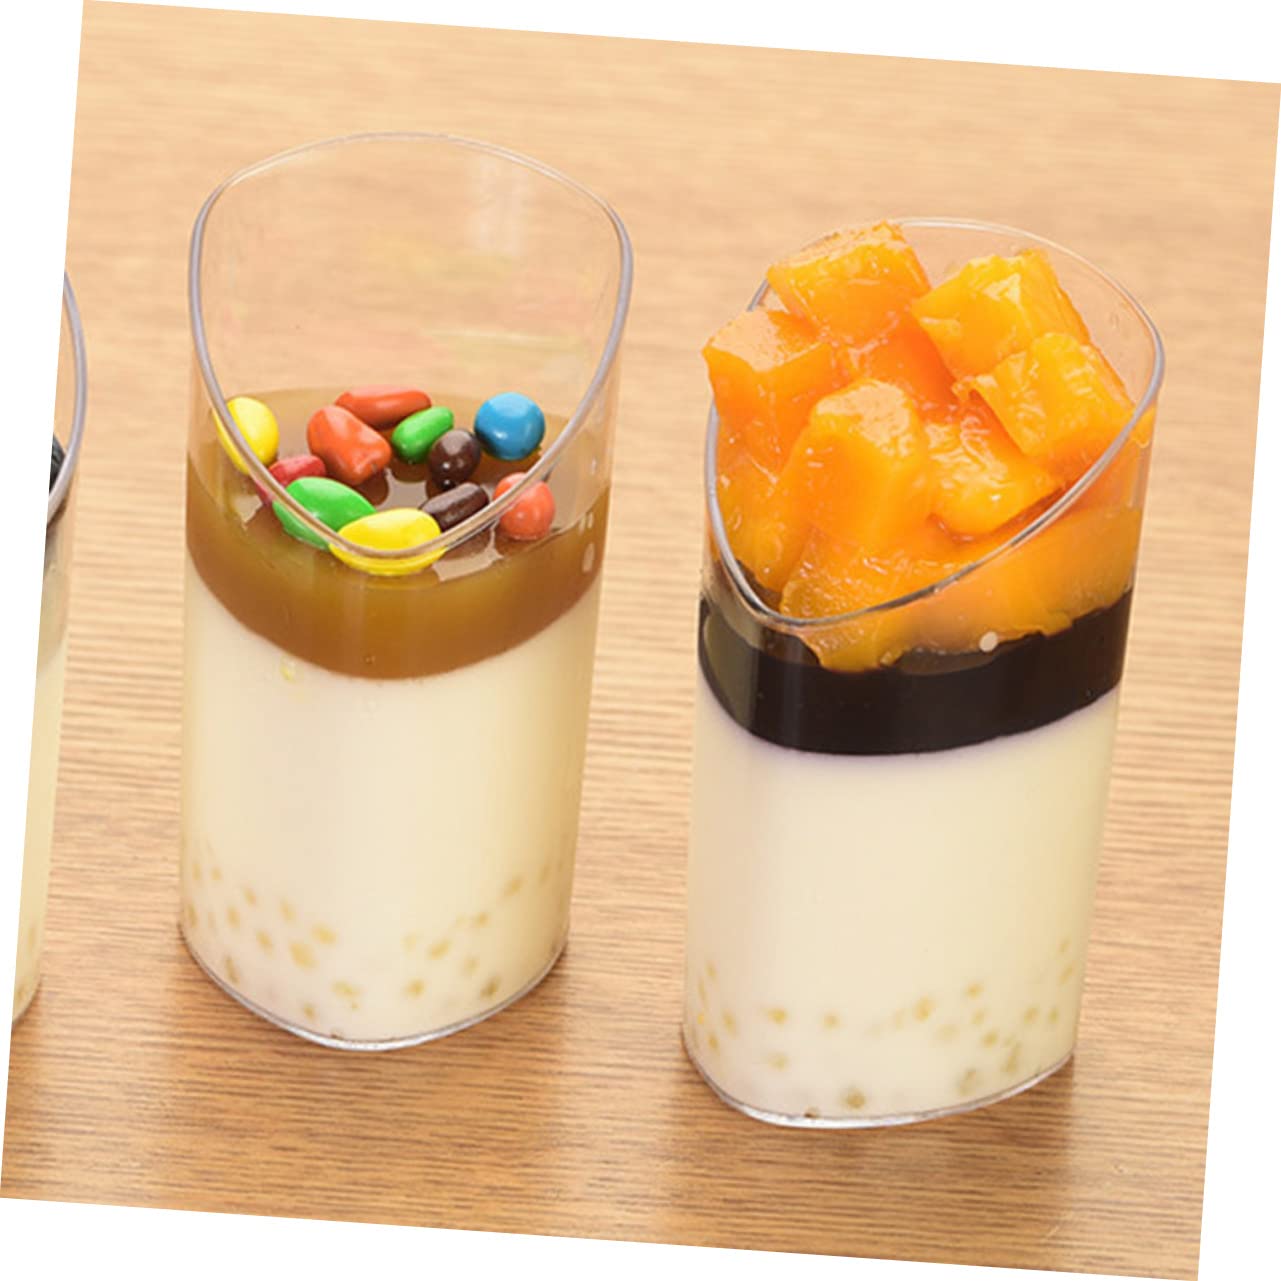 MUSISALY 10pcs Desert Cups Mini Glass Dessert Cup Small Bowl Parfait Mousse Cup Wood Bran Pudding Cup Plastic Parfait Cup Transparent Dessert Cup Cheese Snack Cup Ice Cream Cups